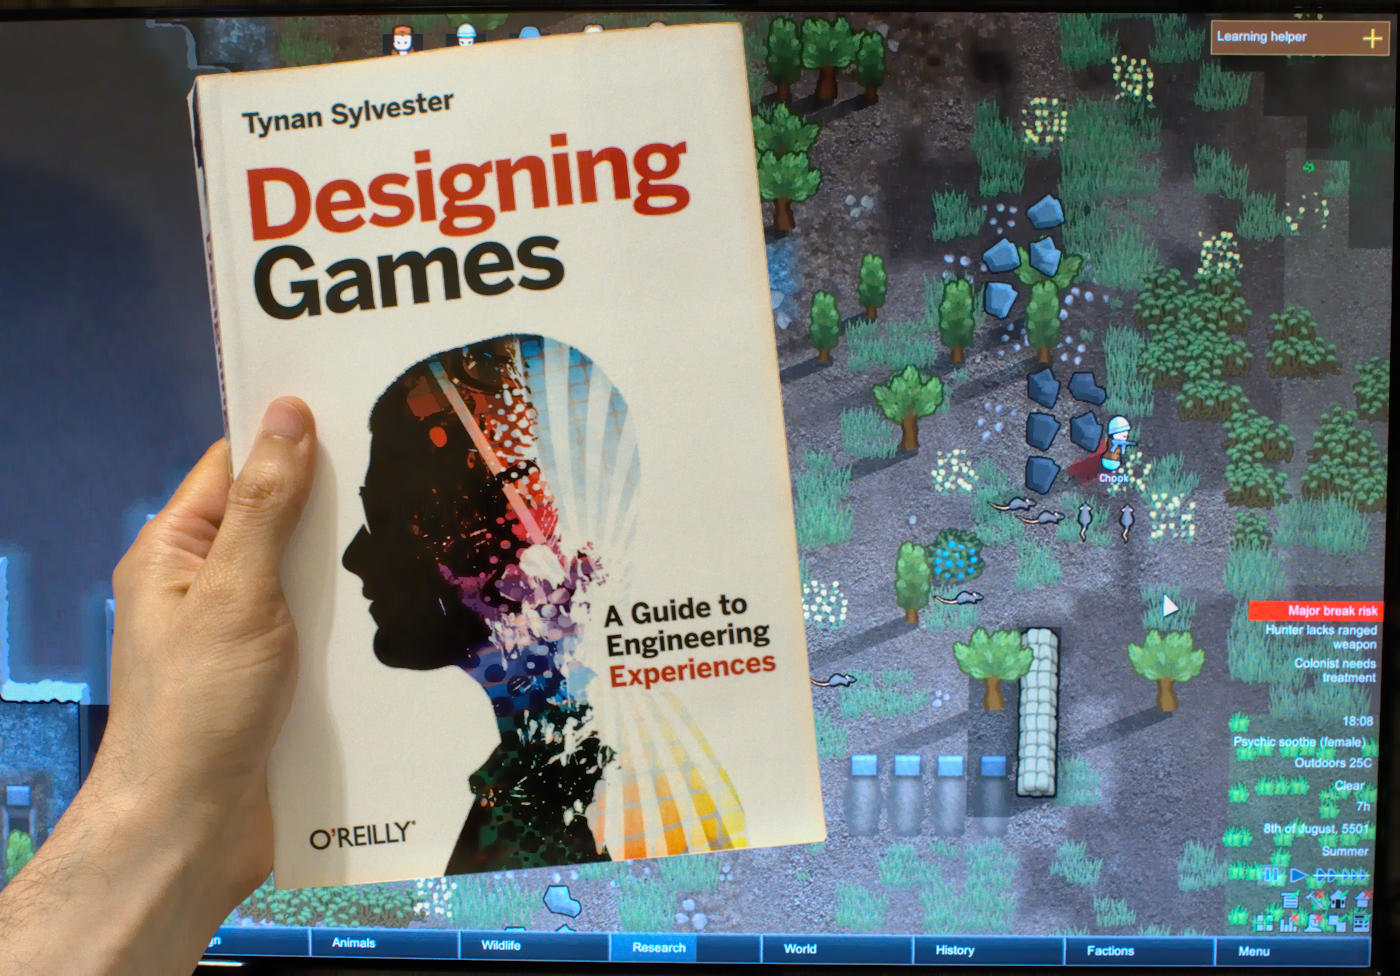 Book 'Designing Games', by Tynan Sylvester, being hold in front of a monitor displaying RimWorld.